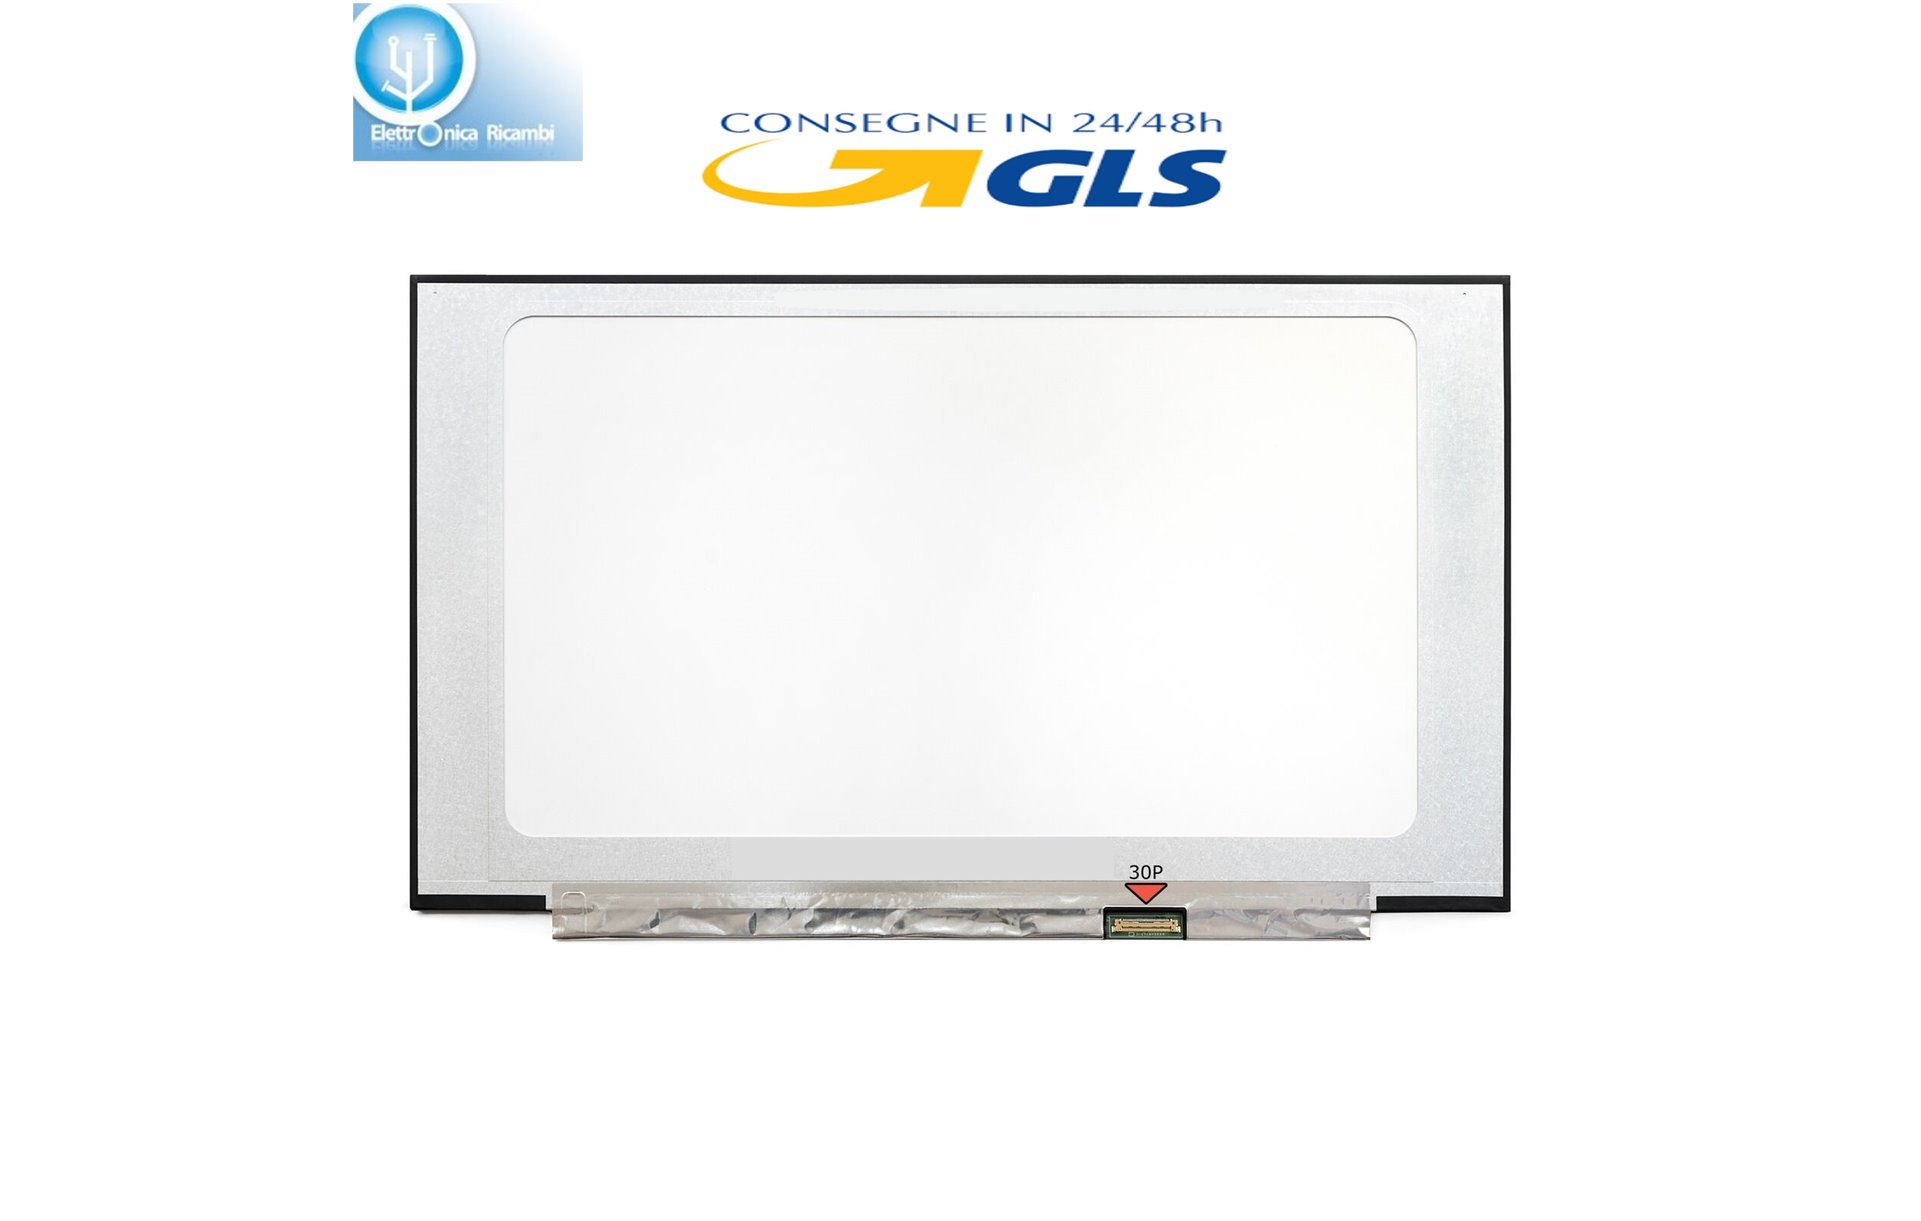 DISPLAY LCD Schermo Dell INSPIRON 15 5508 15,6" (13.6"x7.6") LED 30 pin  IPS